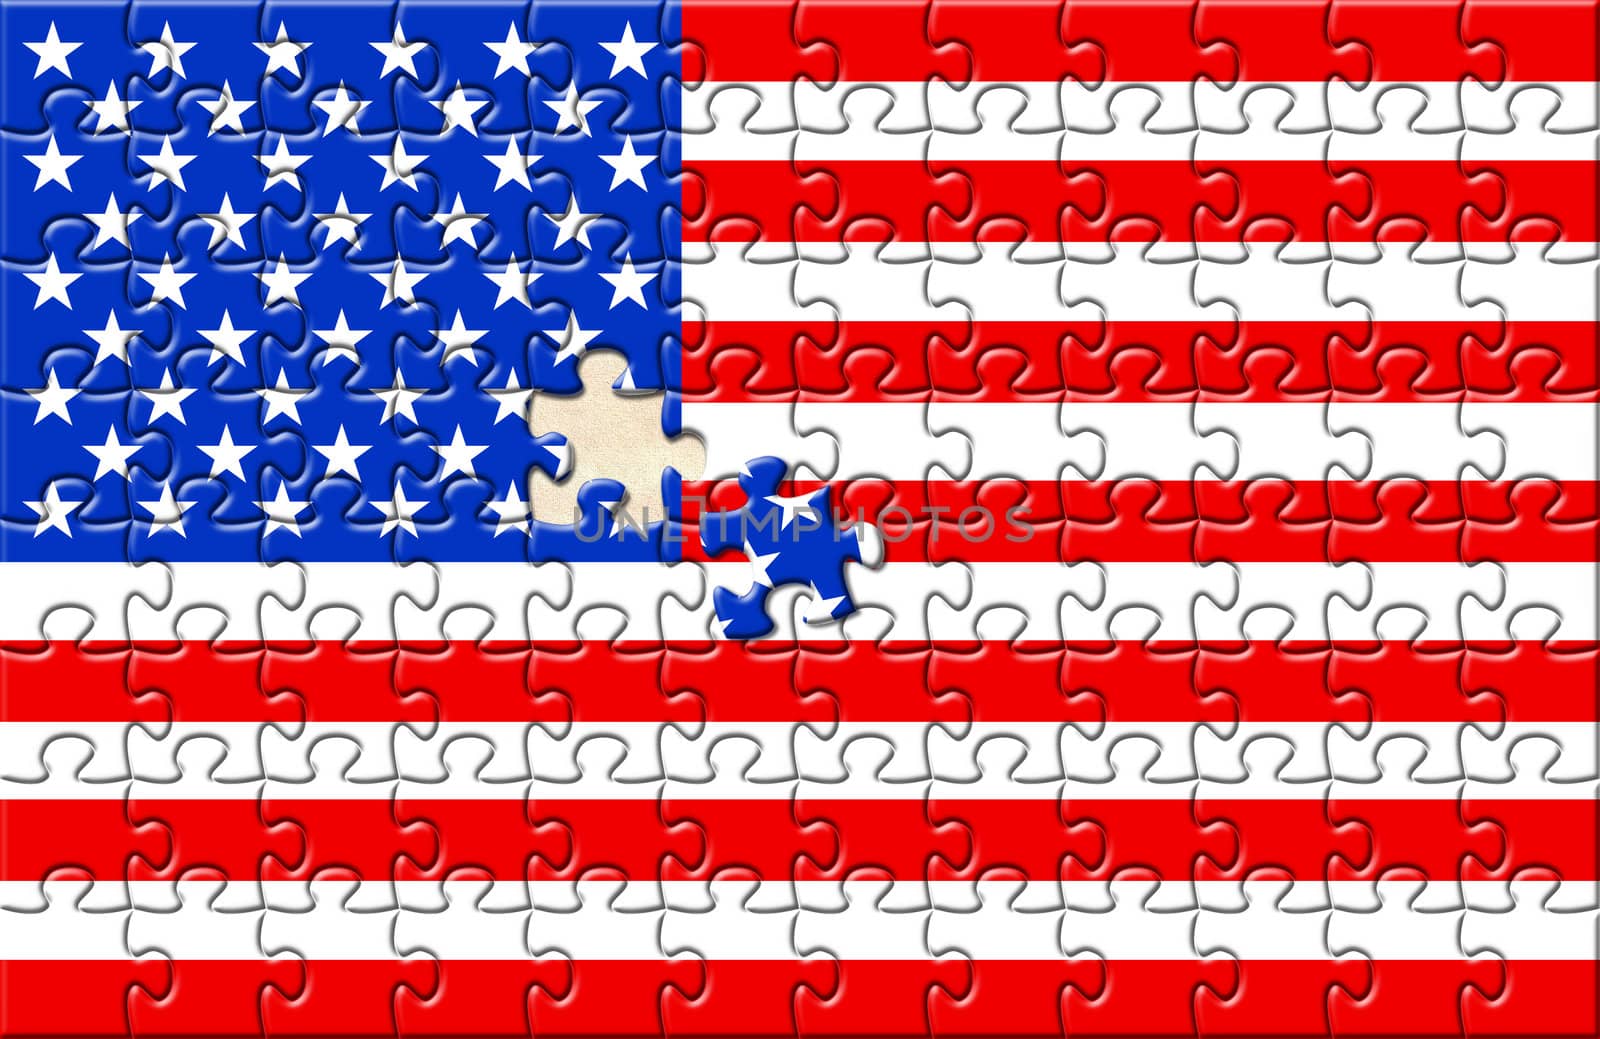 Puzzle with flag USA and one element not closed yet. Placed over paper texture.